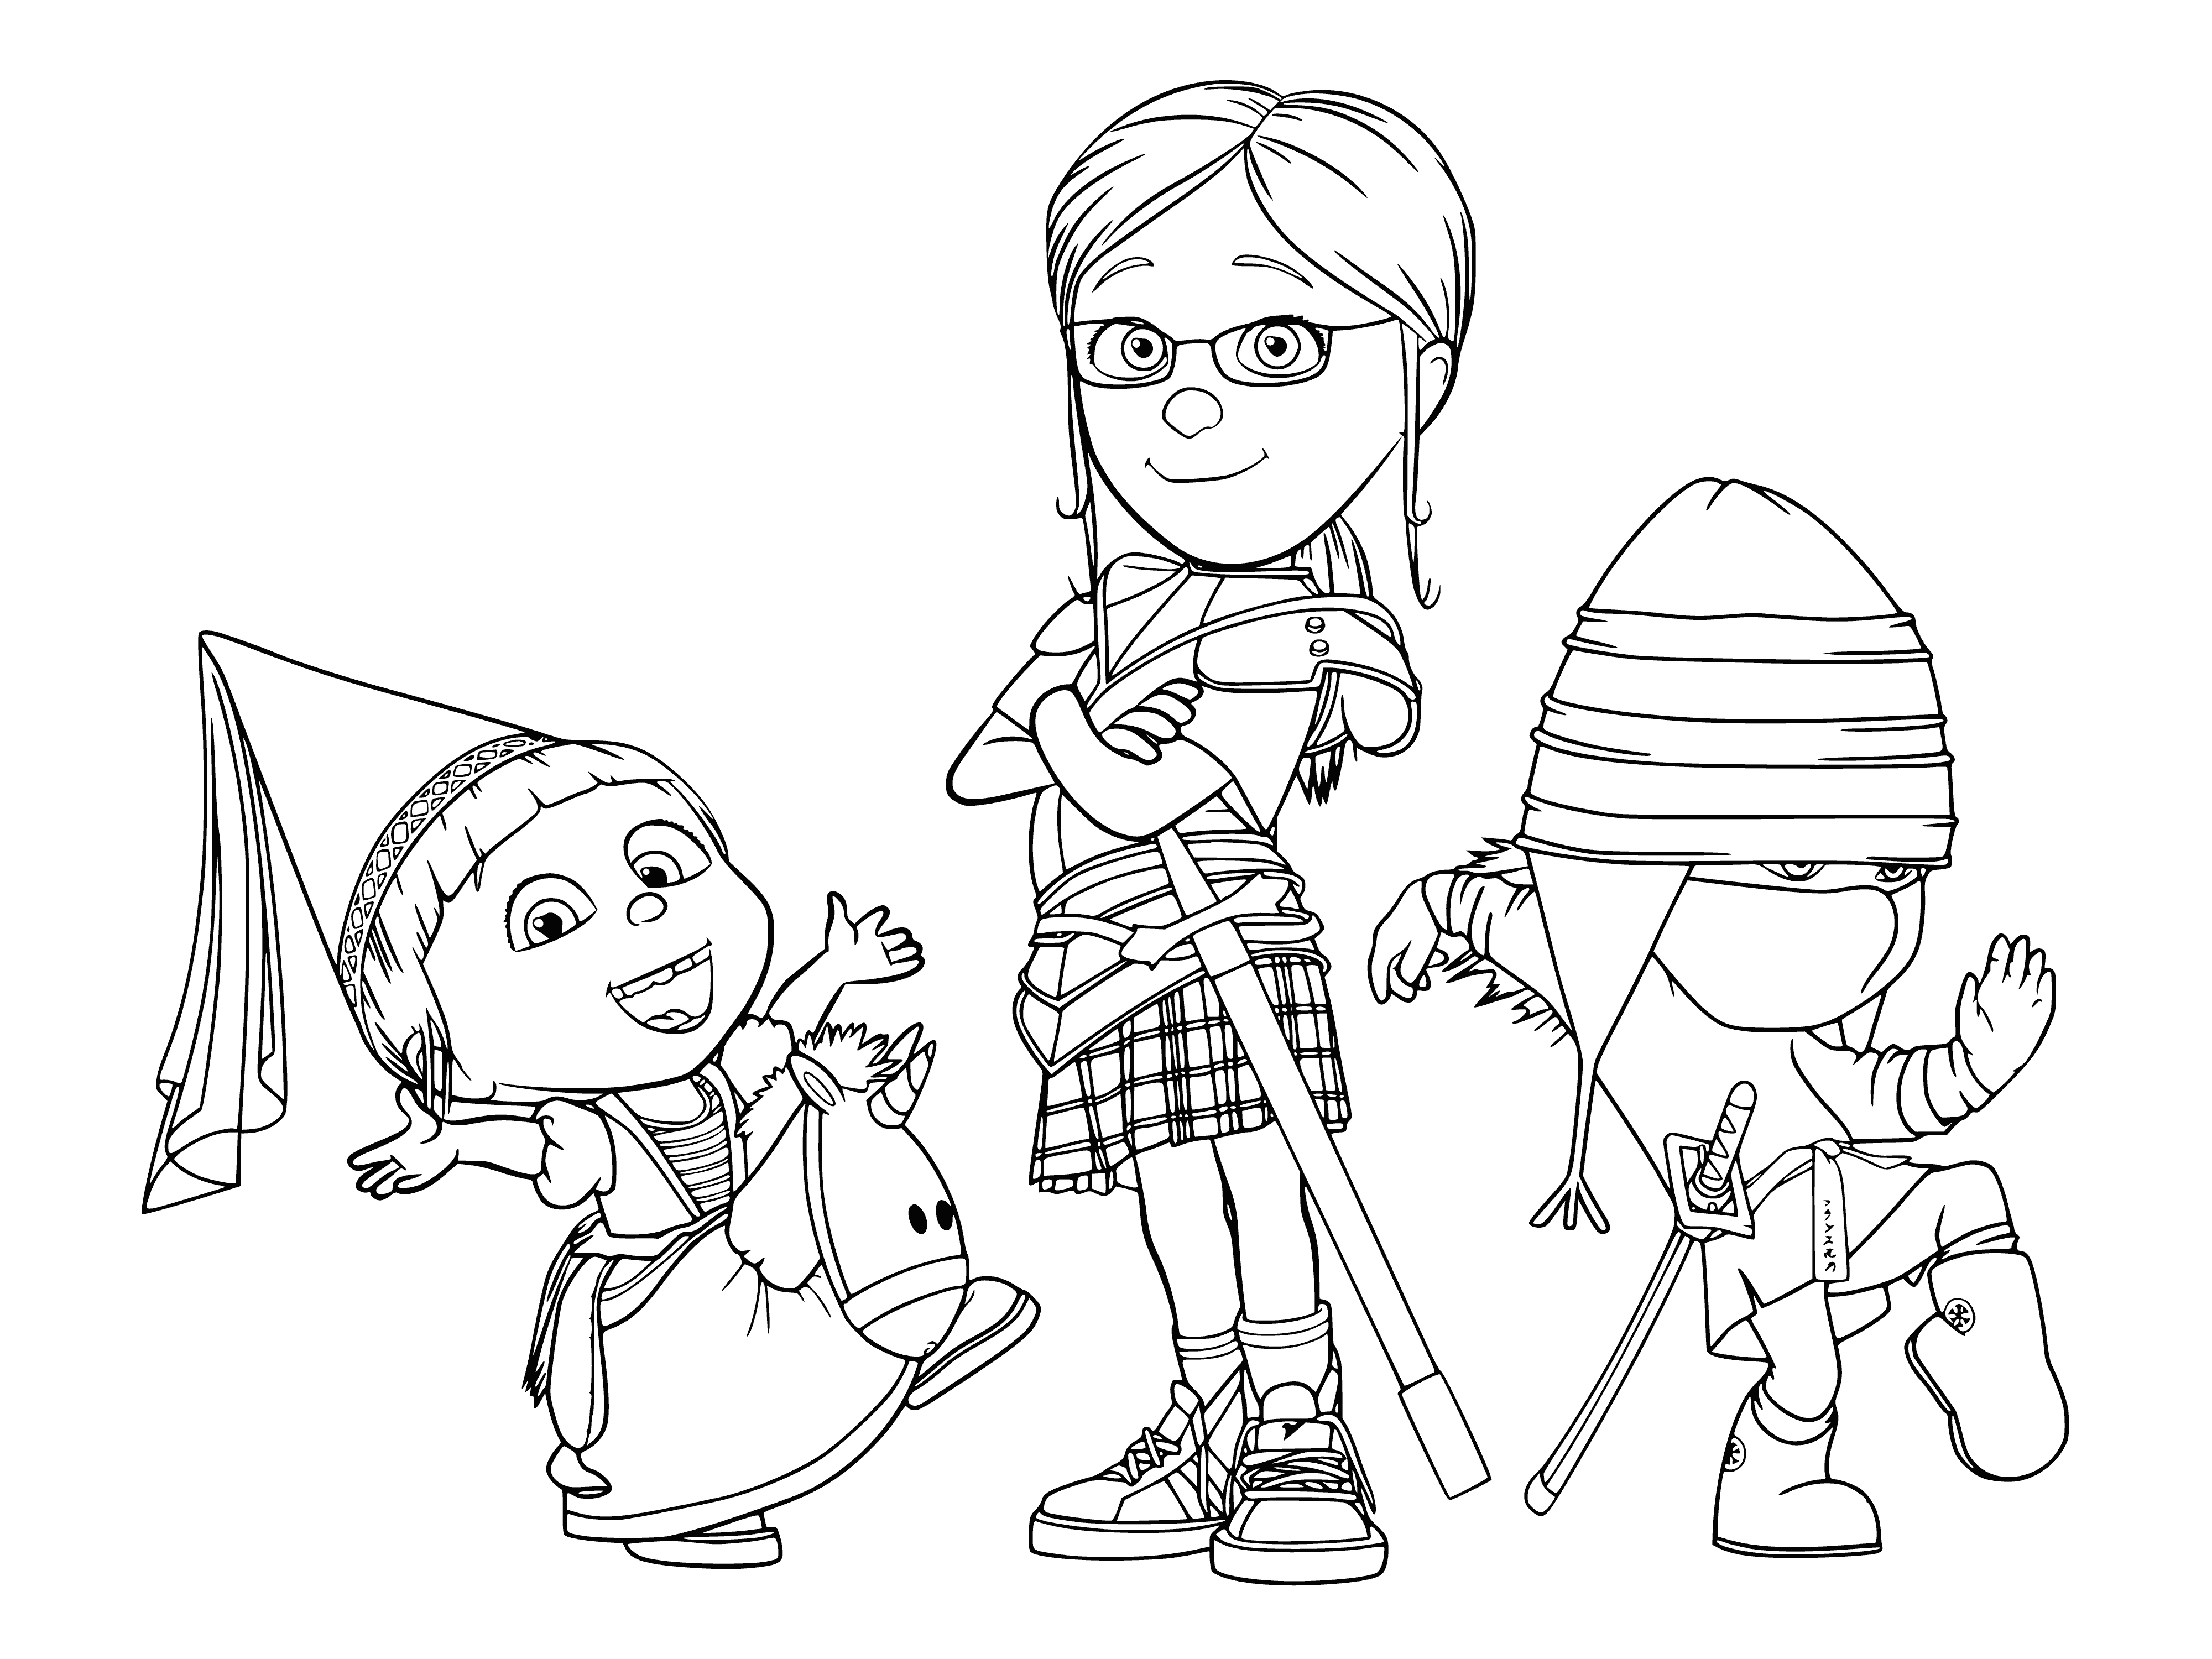 coloring page: Three adorable girls in Despicable Me costumes smiling sweetly; Agnes in a unicorn costume, Margot in minion costume and Edith as Wonder Woman. #CutenessOverload